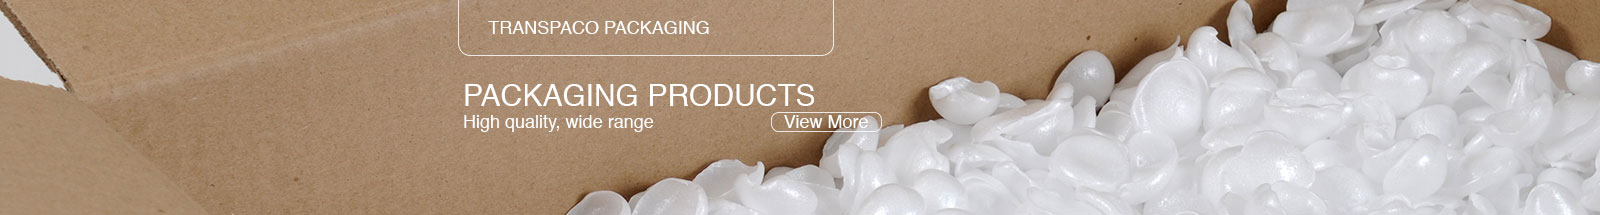 TRANSPACO PACKAGING - Packaging products